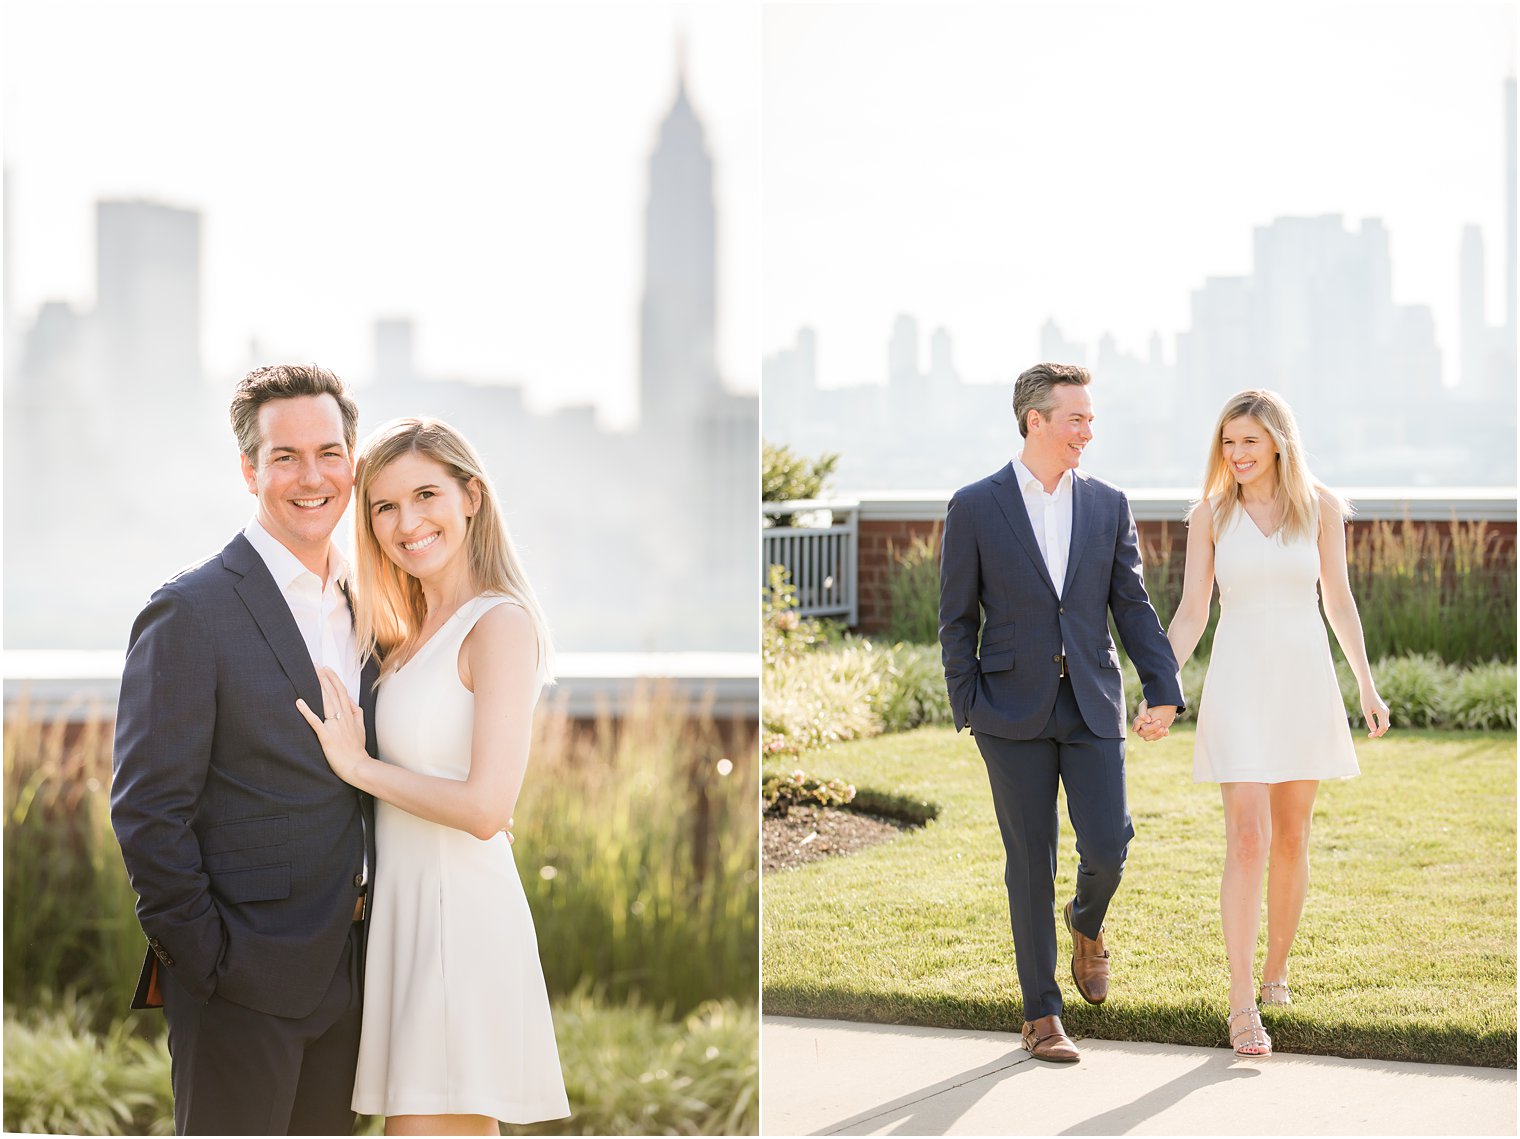 Couple posing for photos | Hoboken Rooftop Engagement by Idalia Photography